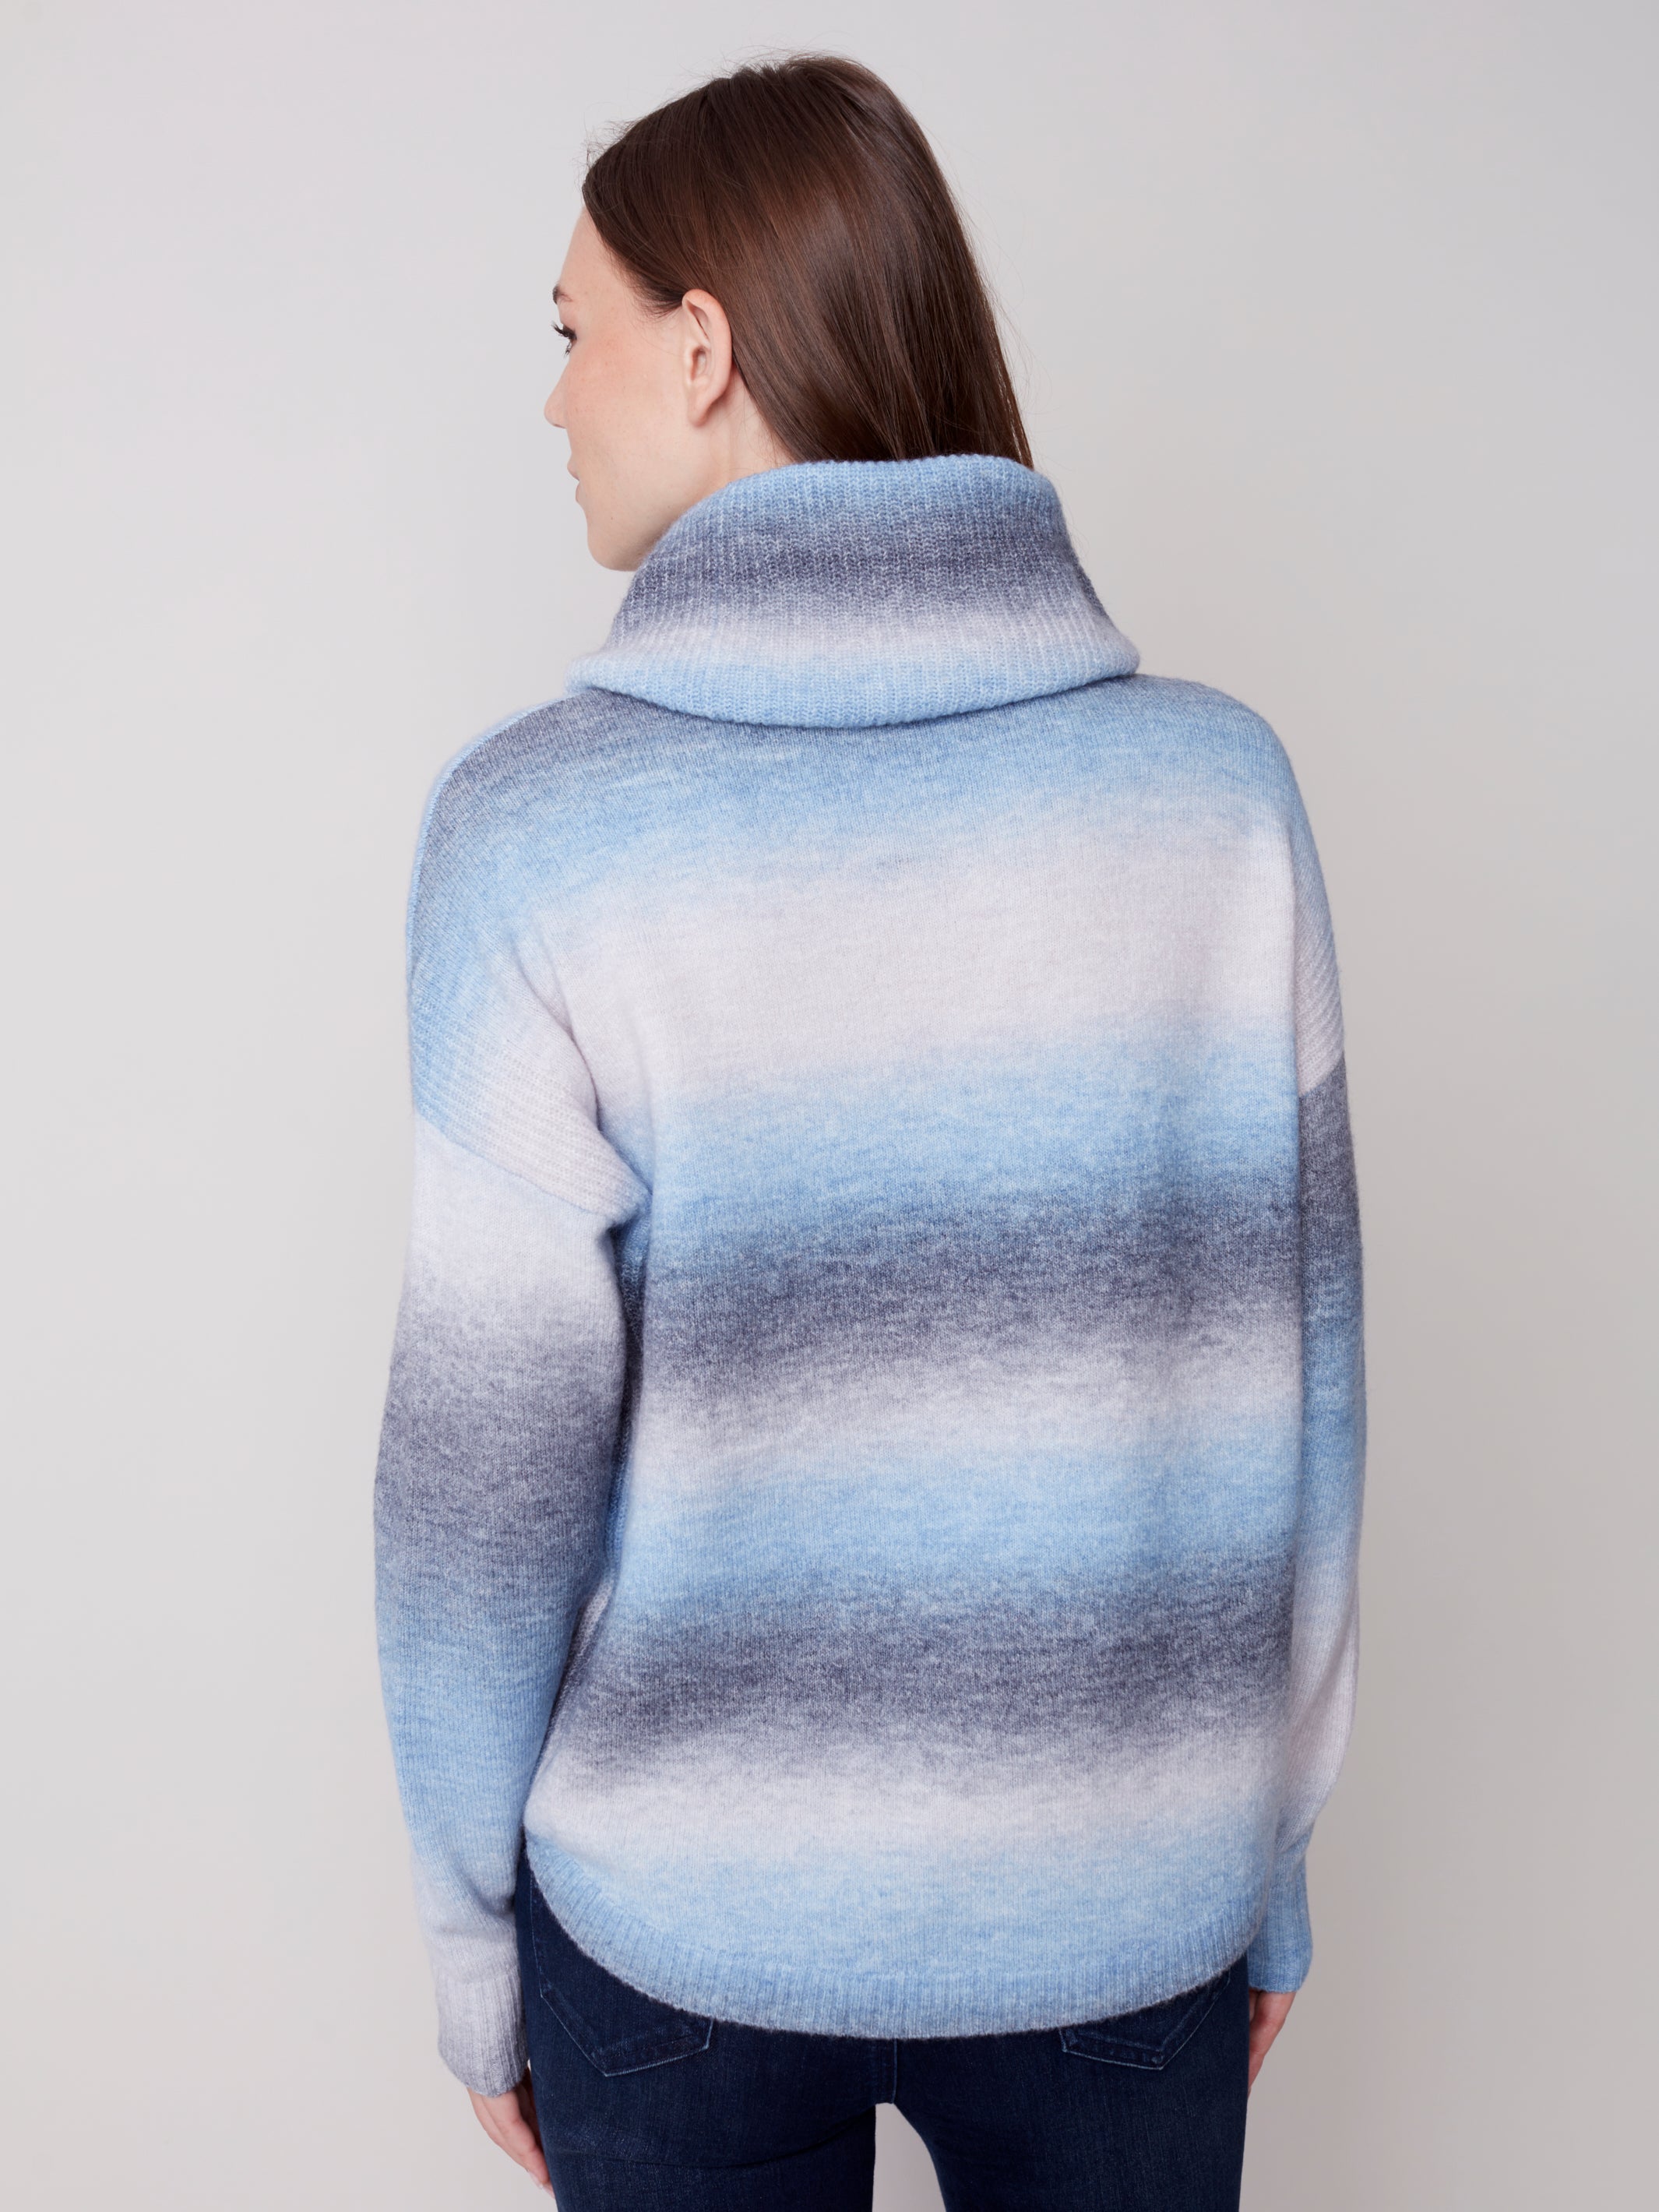 Printed Sweater with Removable Cowl Scarf by Charlie B